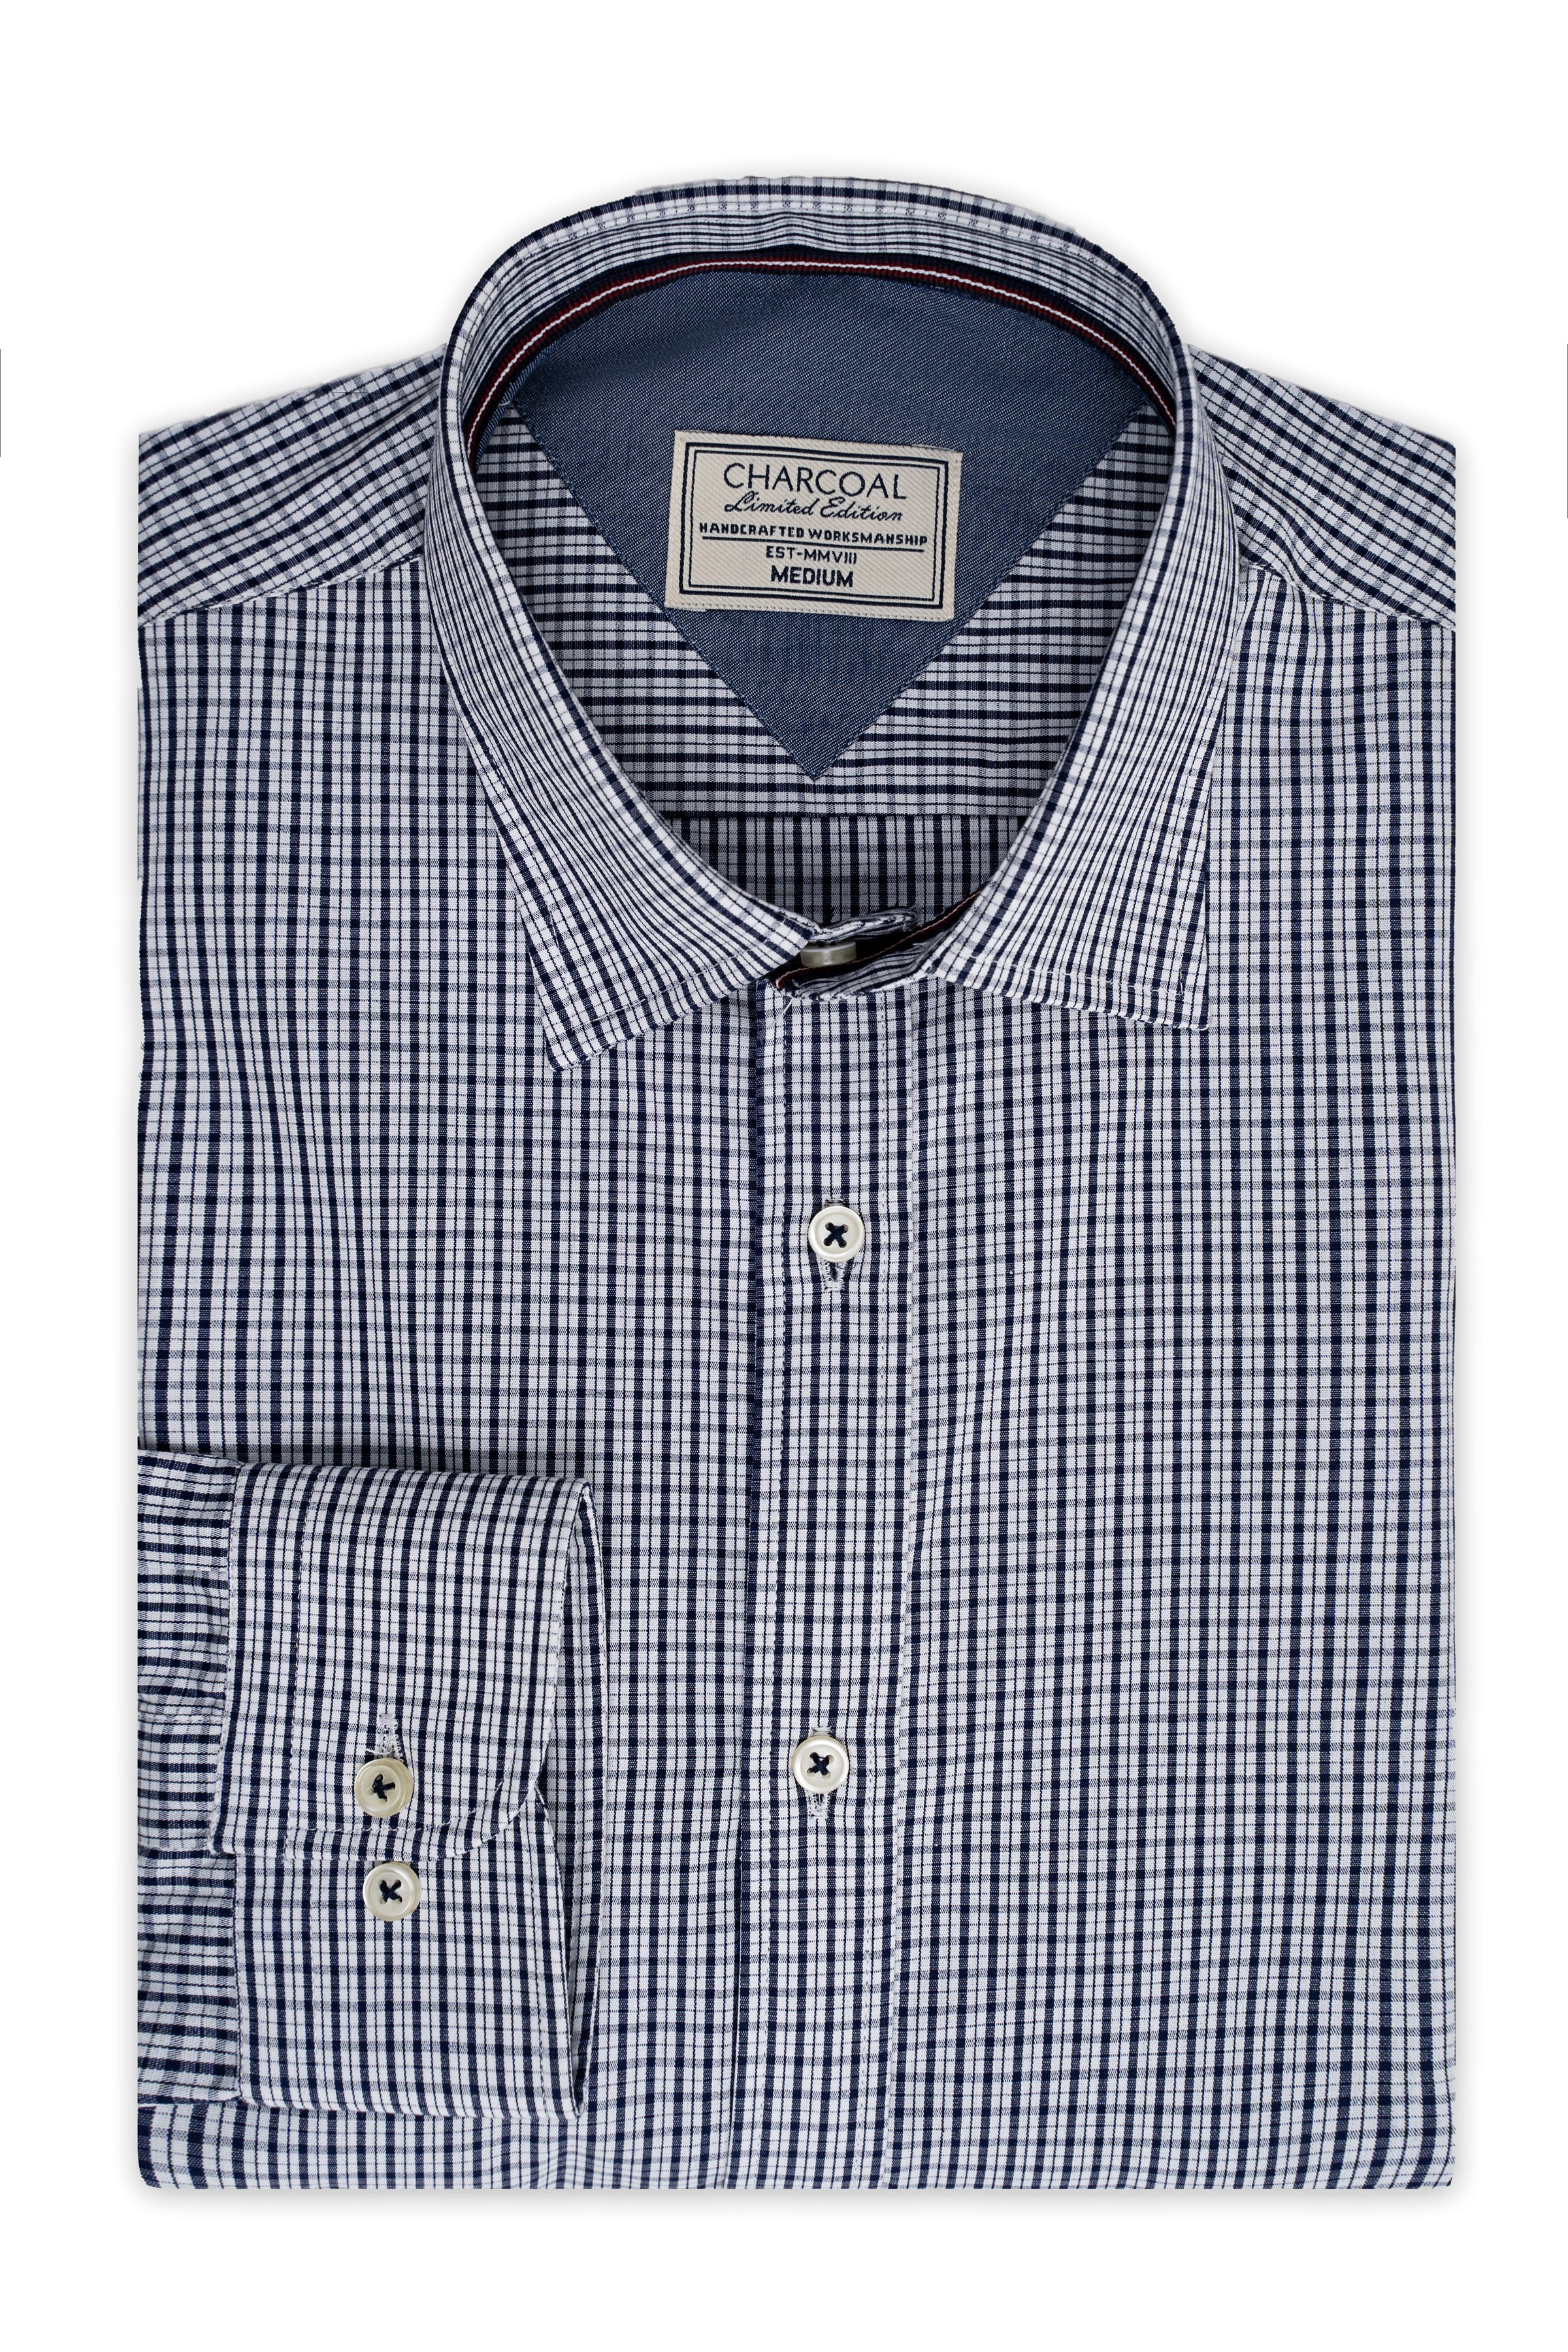 LIMITED EDITION SHIRTS NAVY WHITE CHECK